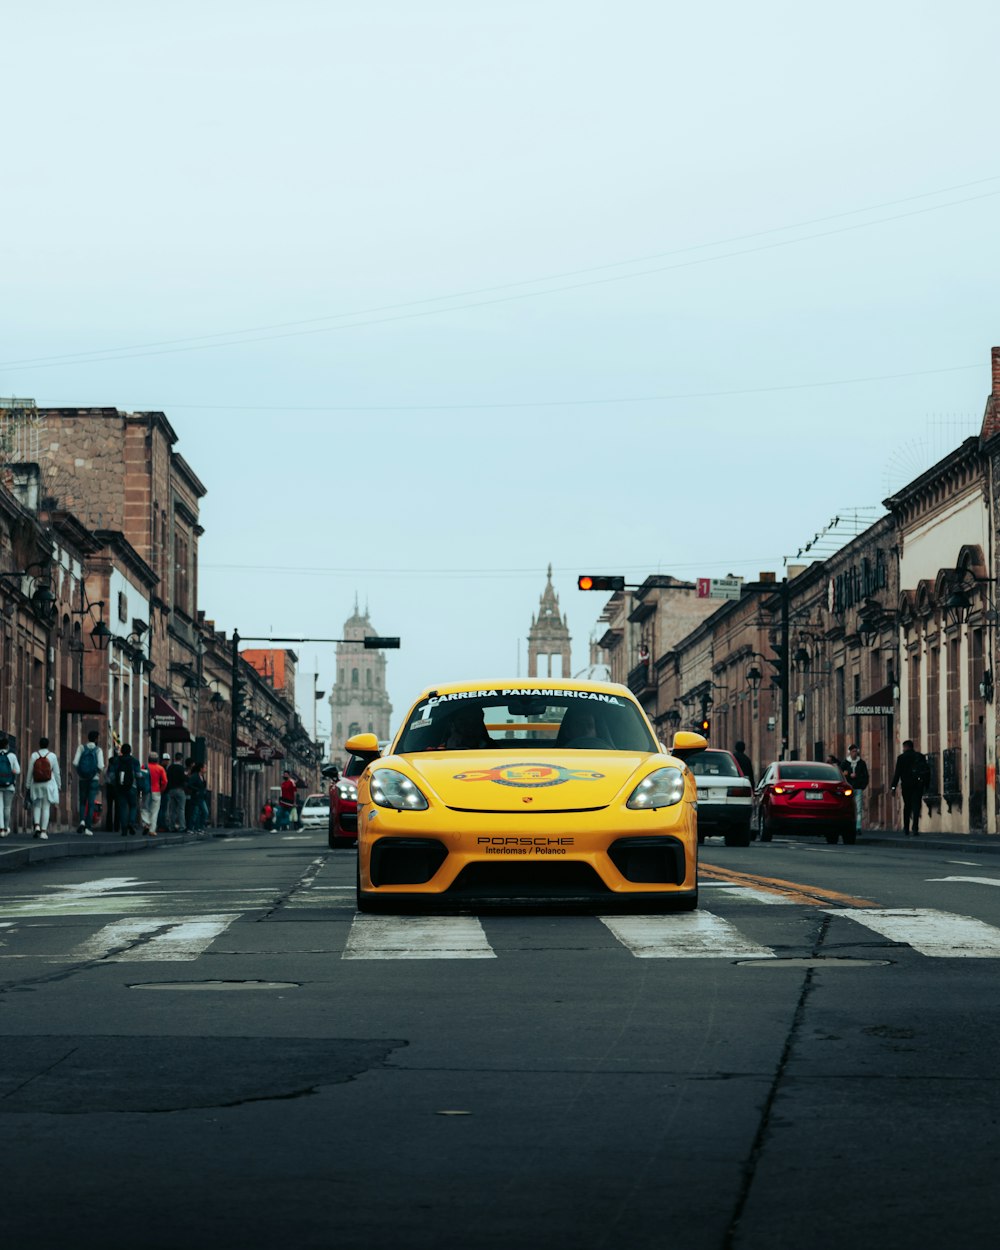 a yellow taxi on a street